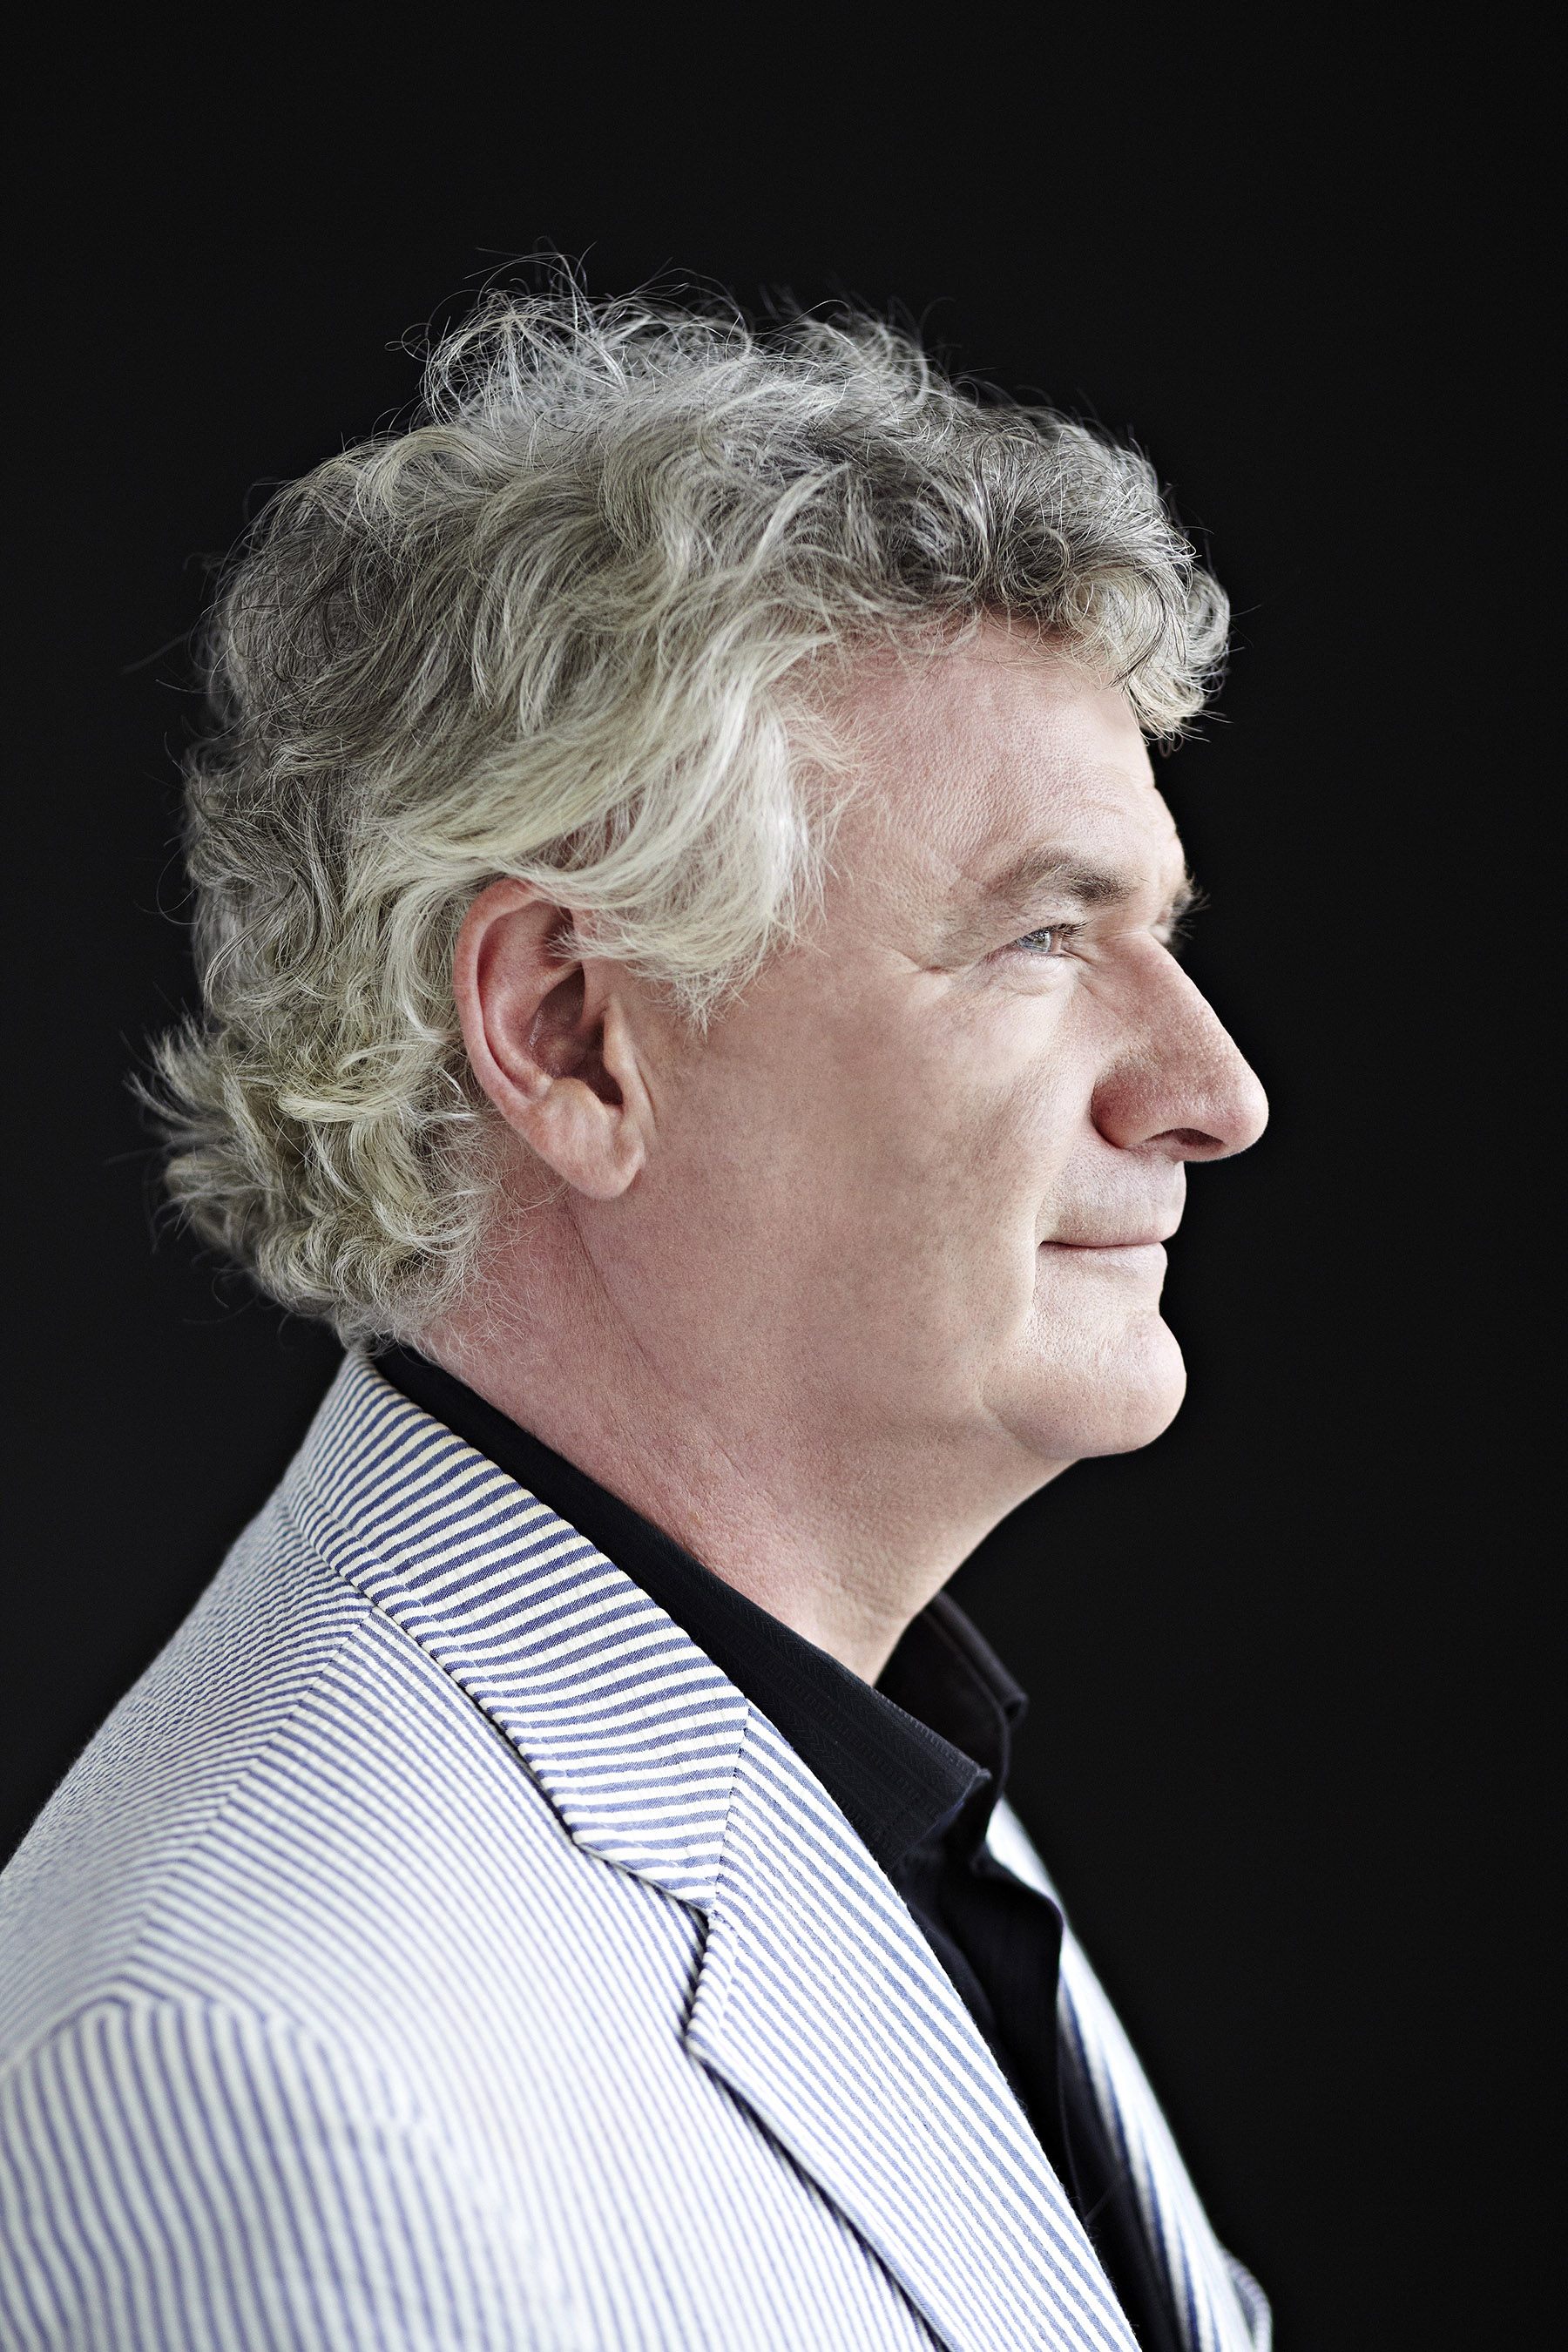 CLASSIC - Singer John McDermott returns to Red Deer this May as part of his national spring tour.